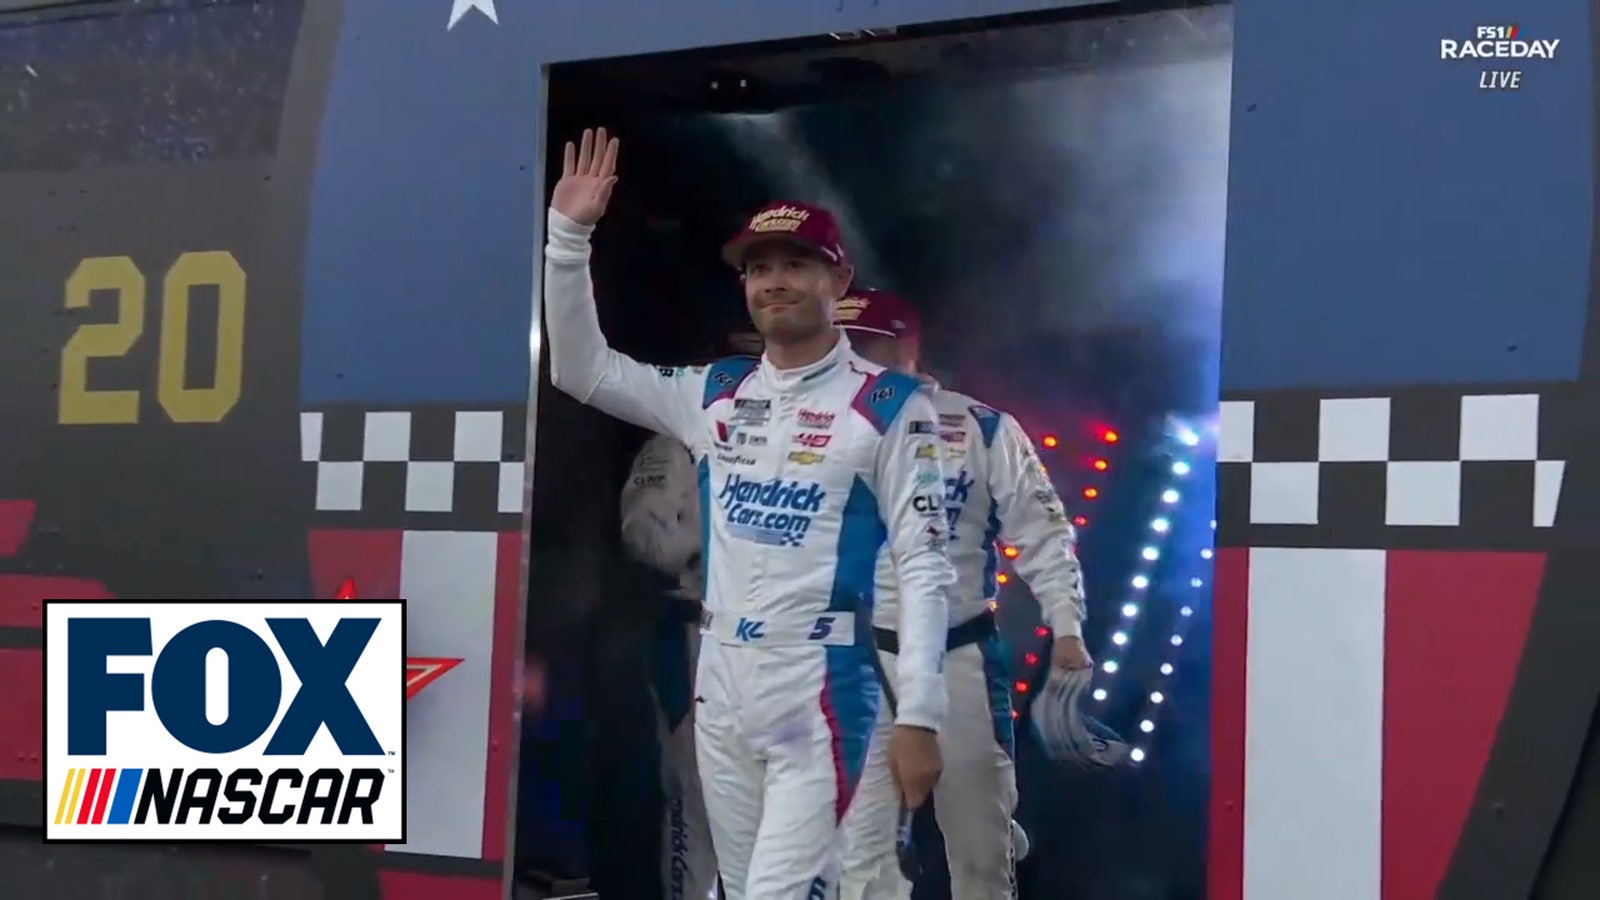 NASCAR All-Star Race: Kyle Larson, Joey Logano and others walk out before big event